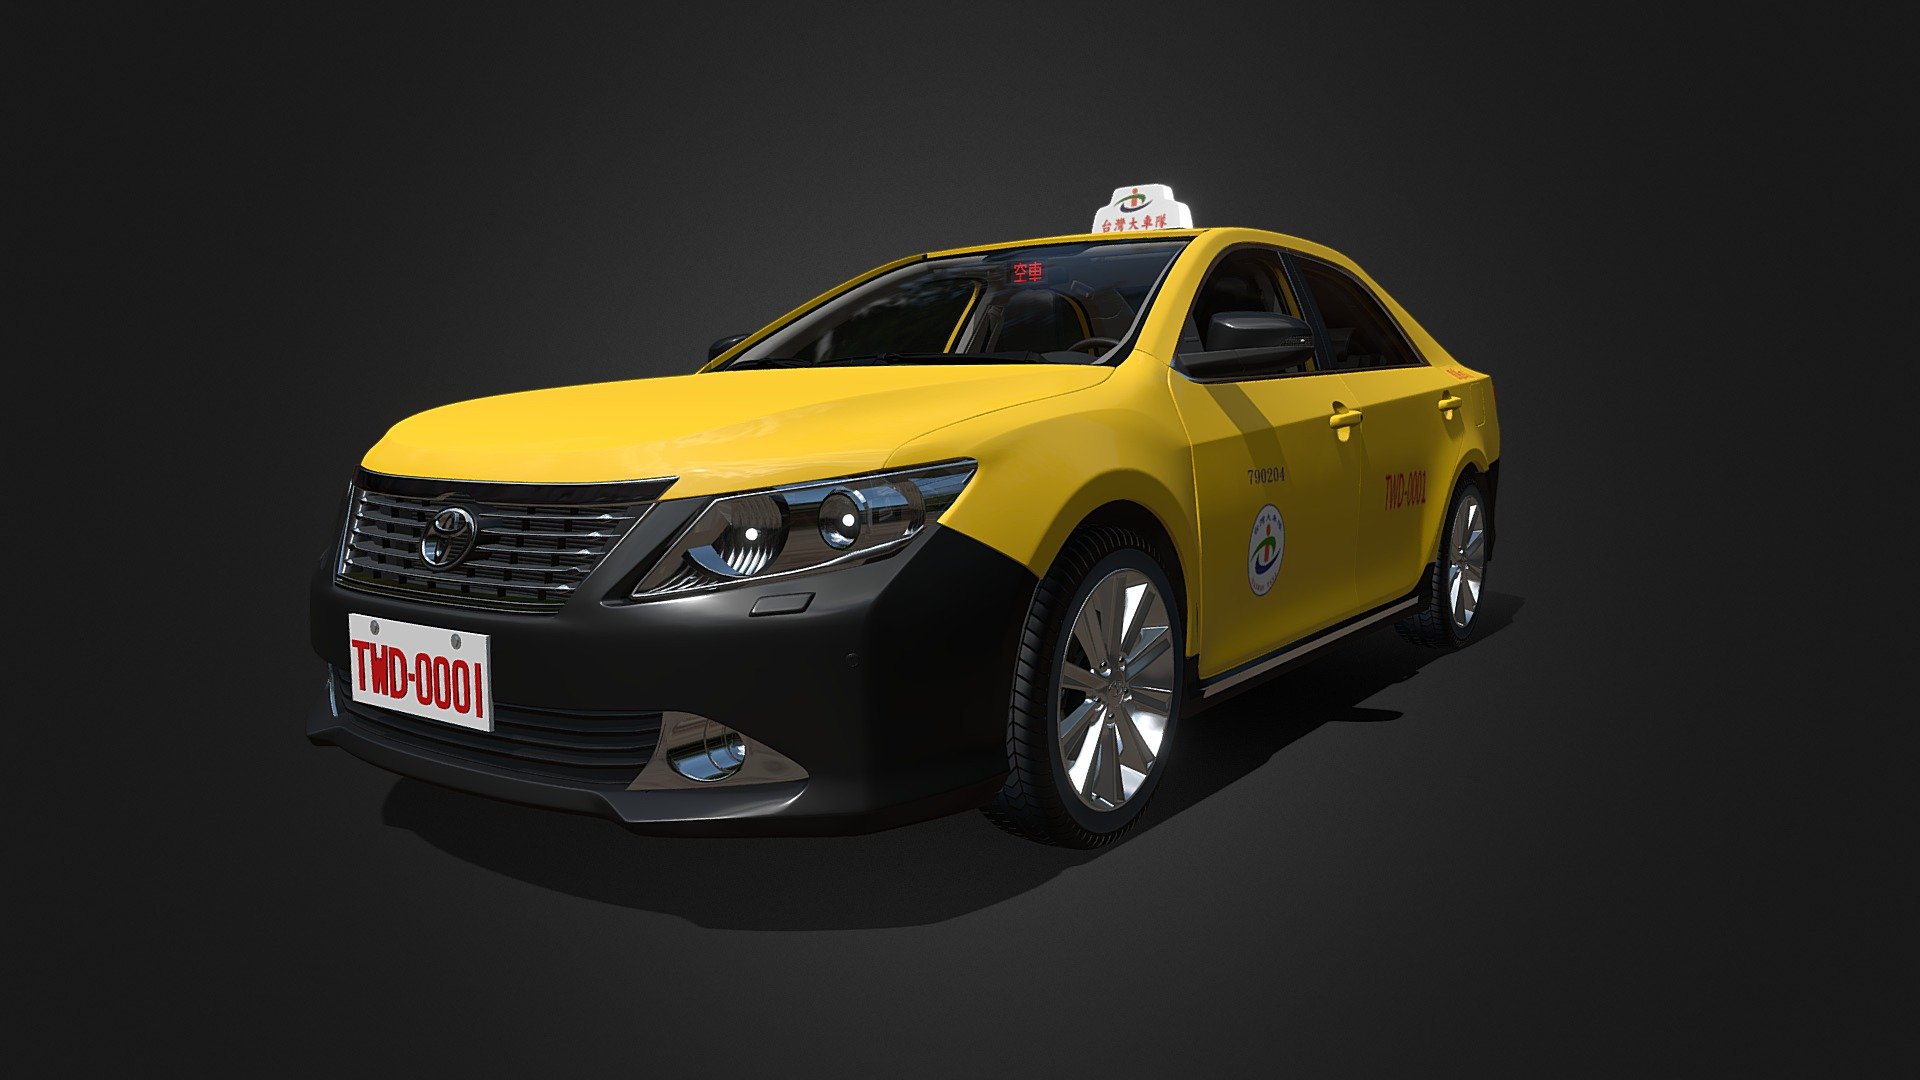 Toyota Camry 2012 (Taiwan taxi) - 3D model by Davidson (@a0930582398) 3d model